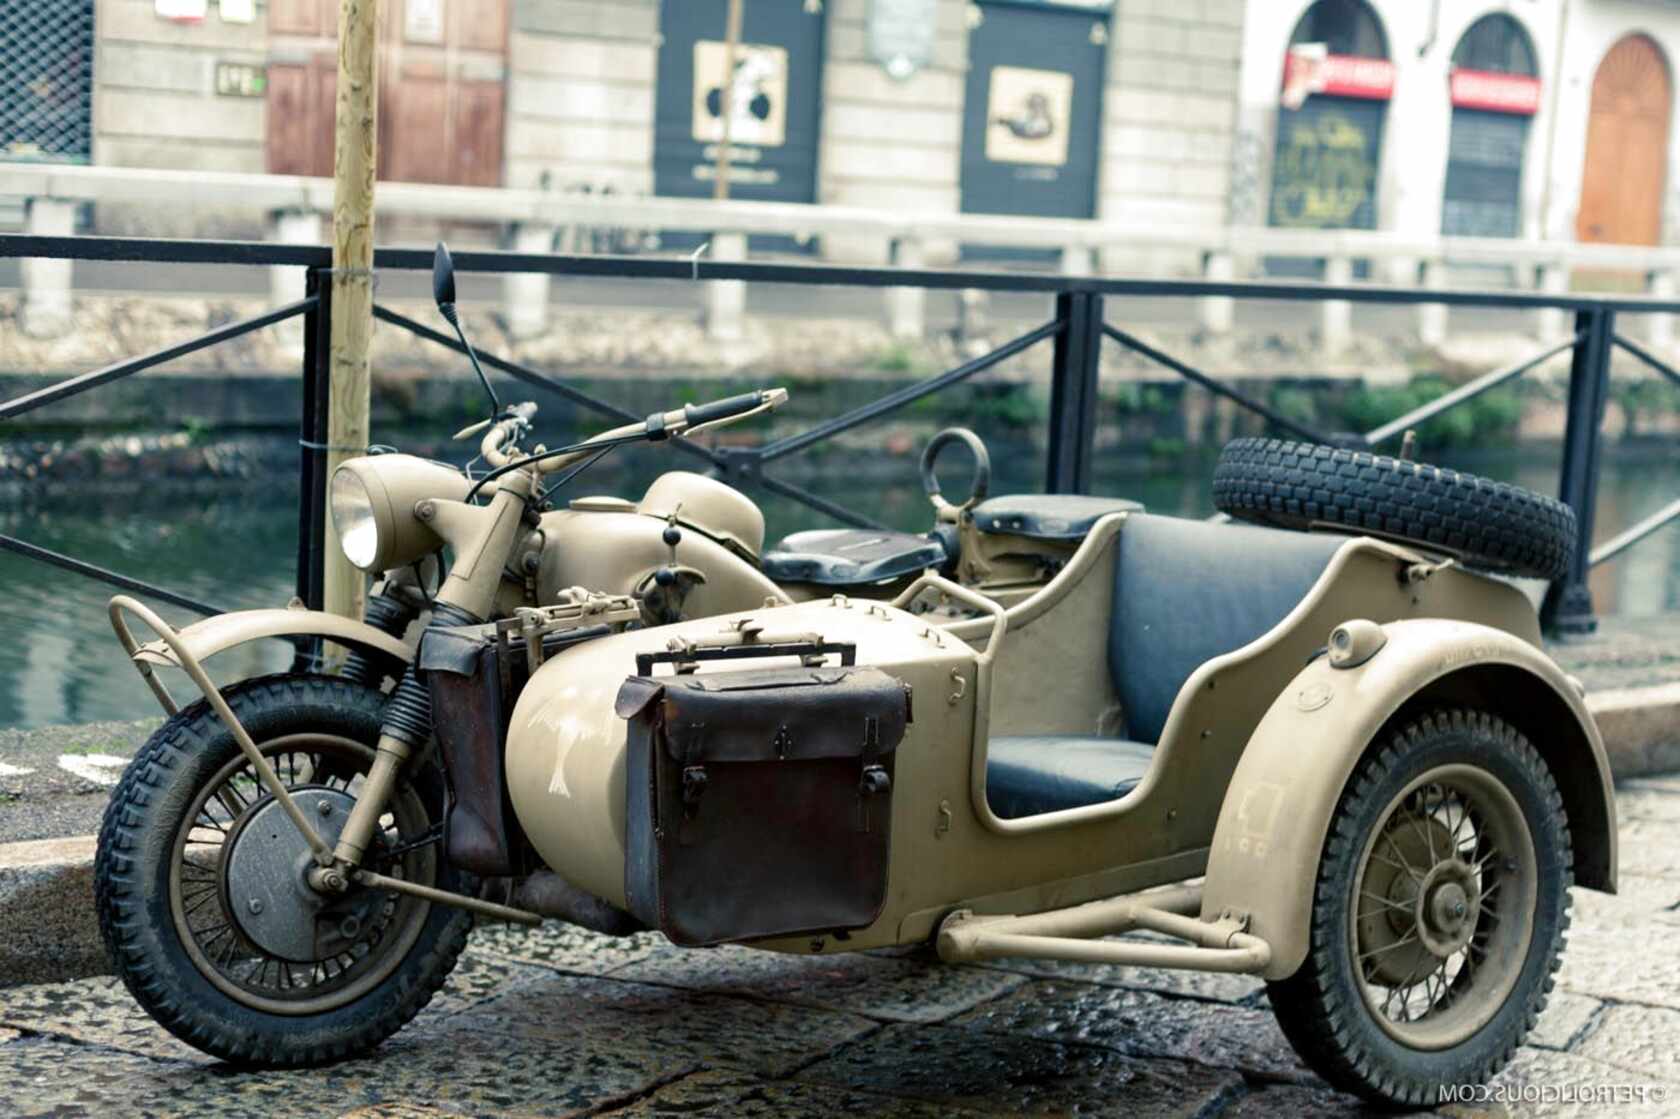 Bmw Motorcycle Sidecar for sale in UK | 56 used Bmw Motorcycle Sidecars